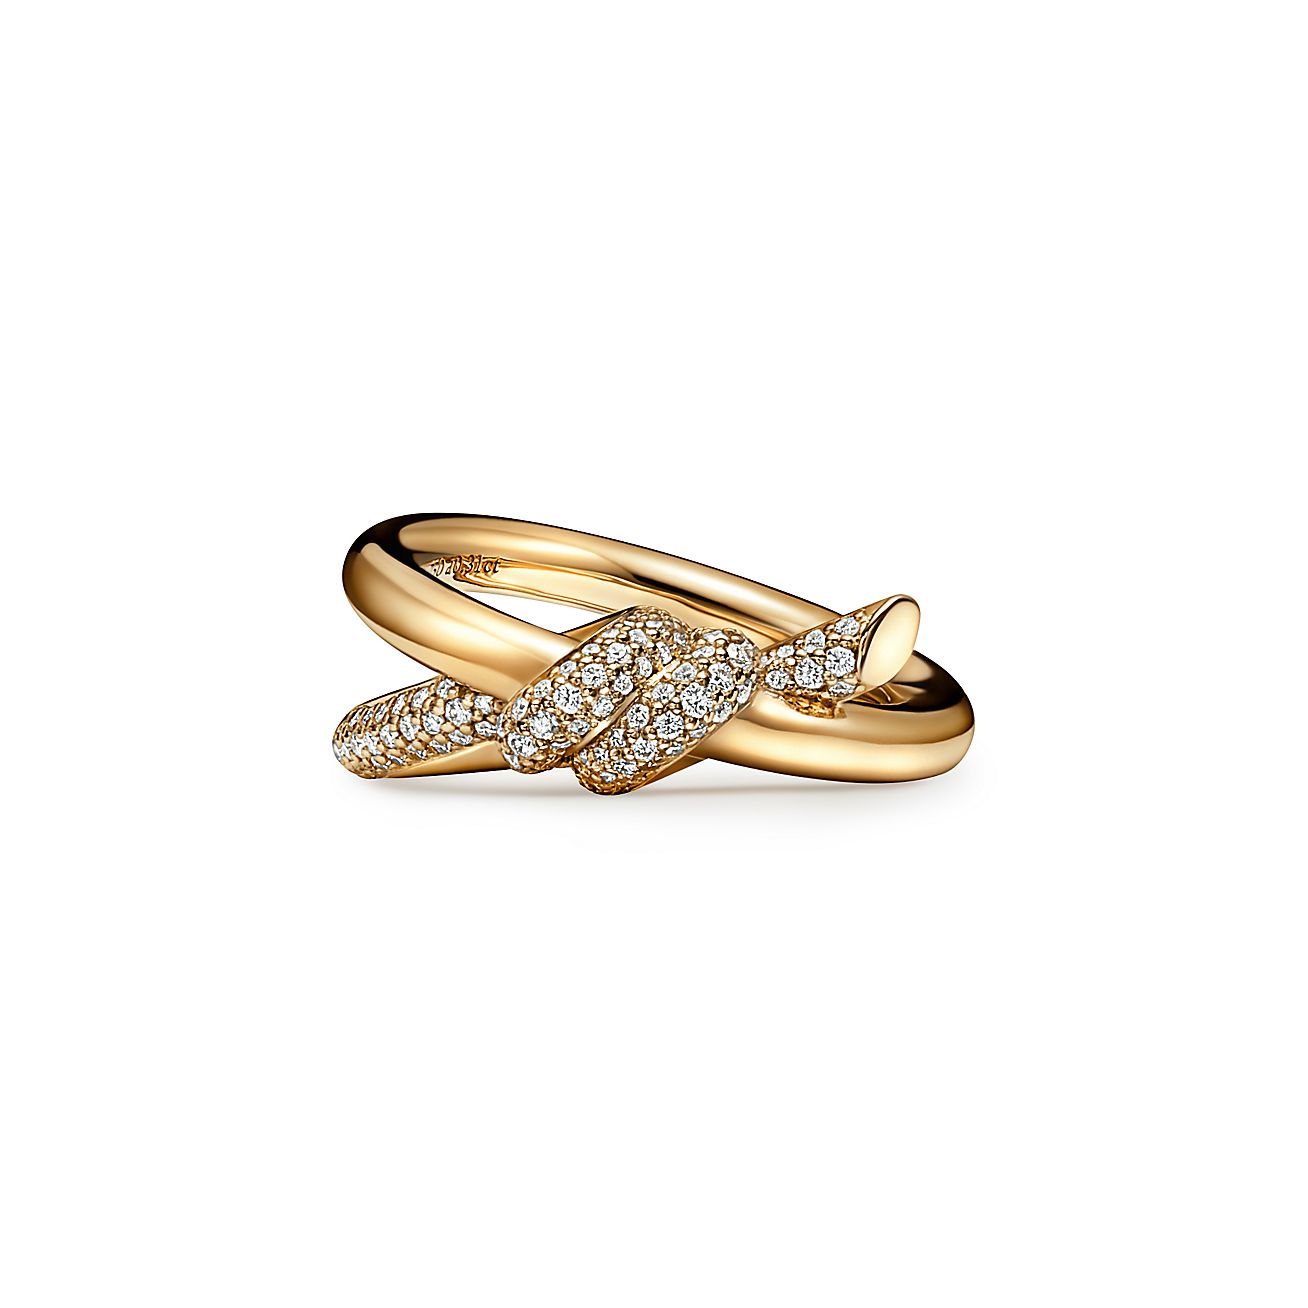 Tiffany Knot Double Row Ring in Yellow Gold with Diamonds, Size: 6 1/2